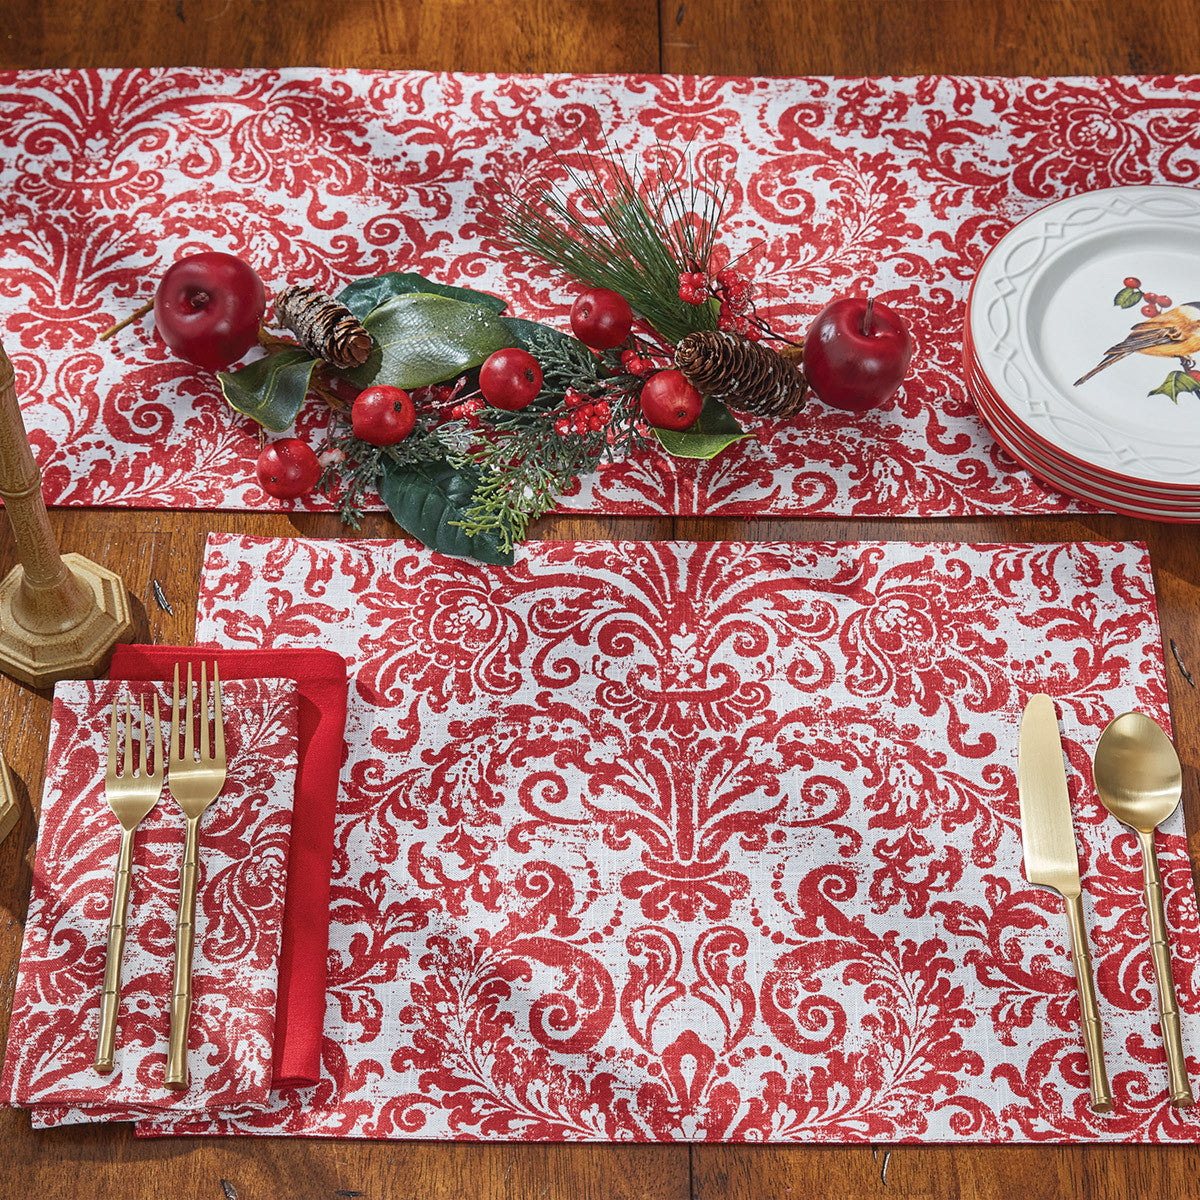 Albemarle Placemats - Red Set of 4 Park Designs